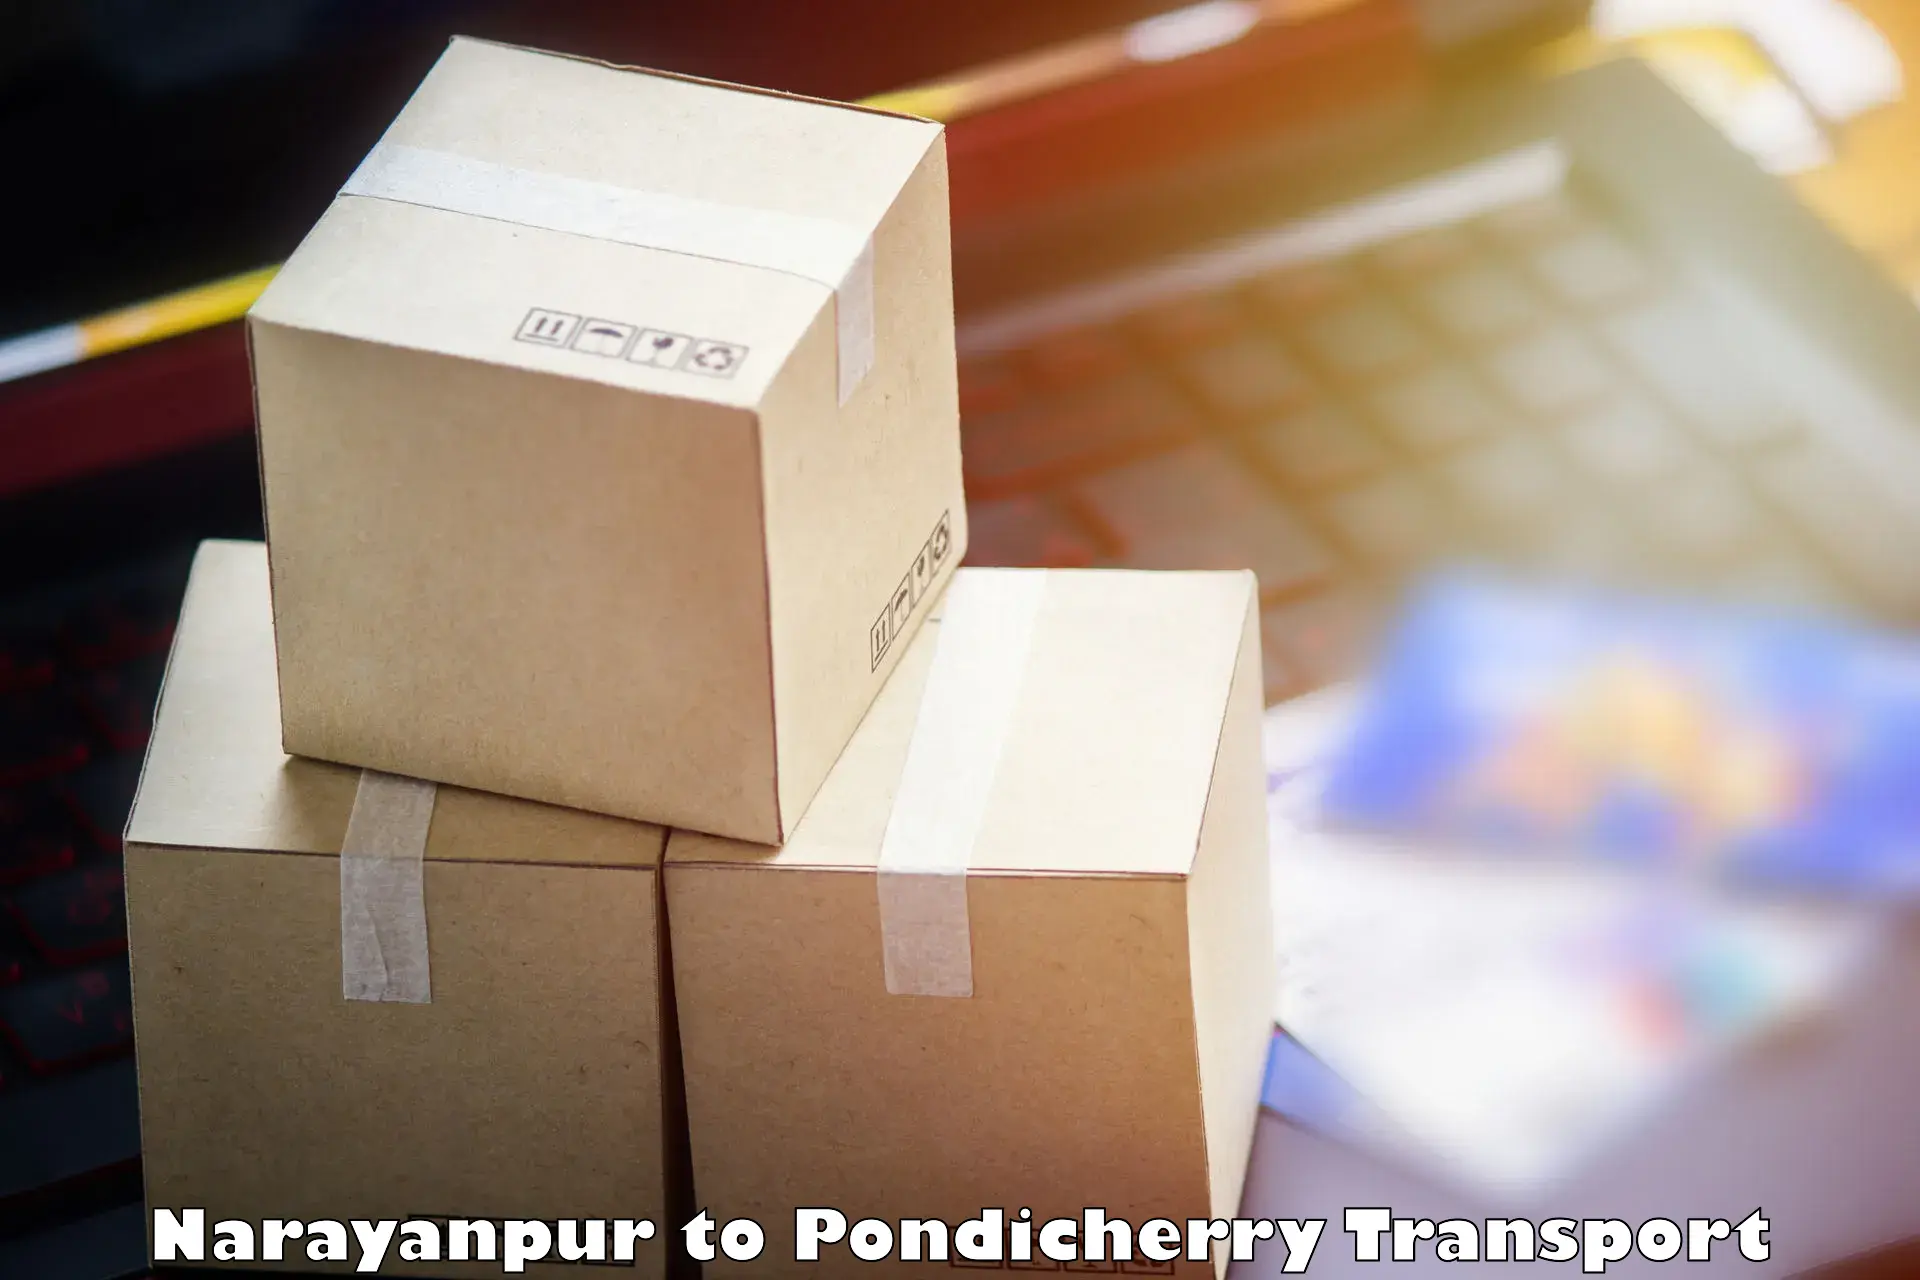 Air freight transport services in Narayanpur to Karaikal